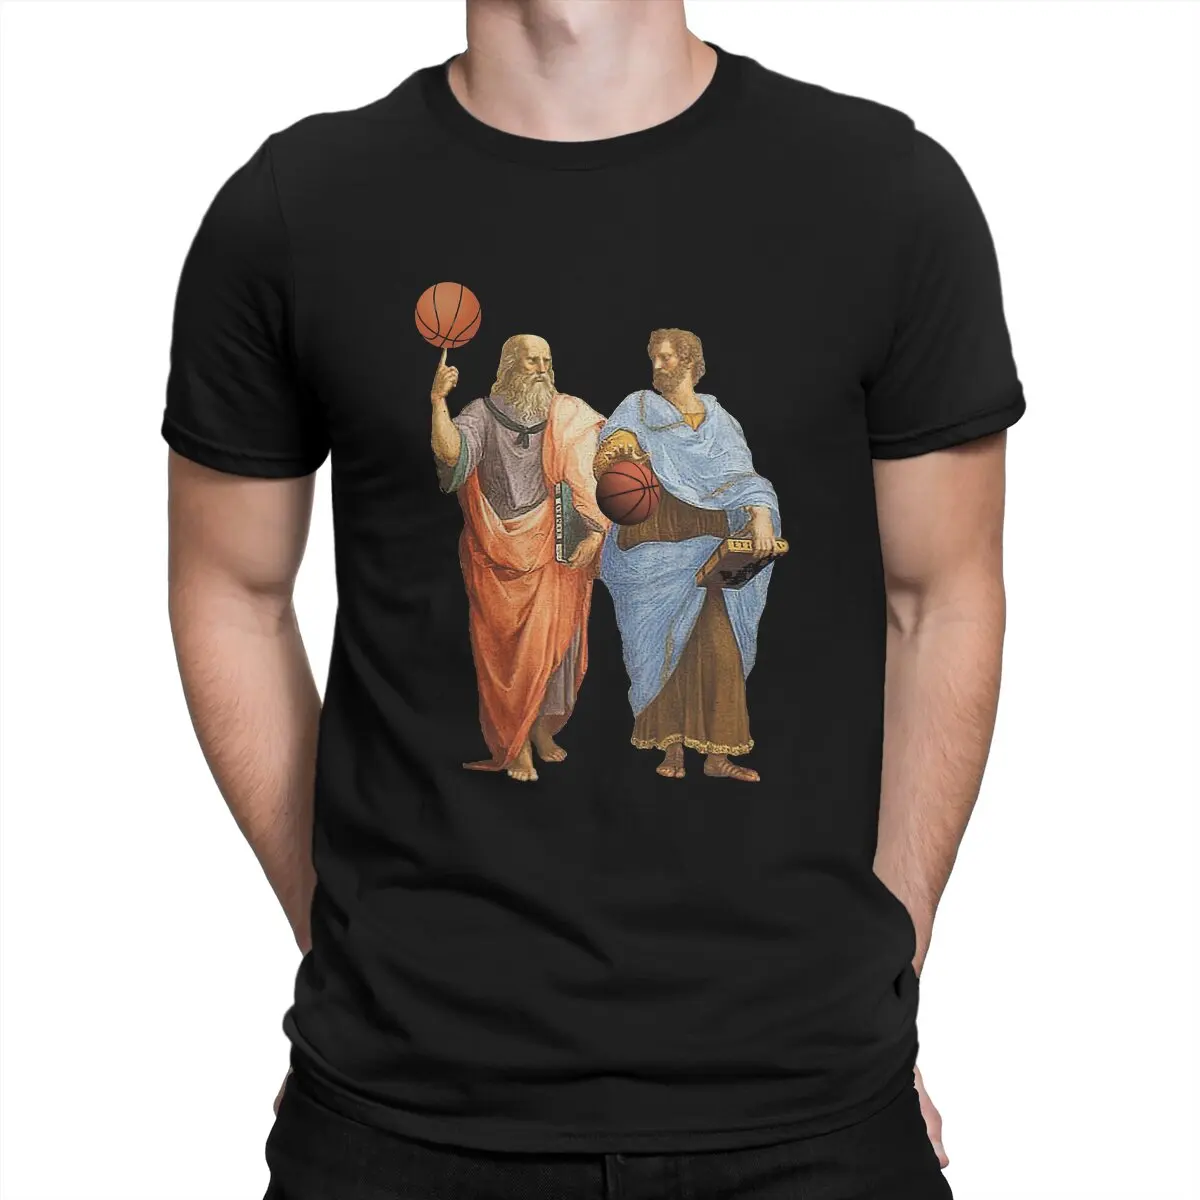 

Hipster Plato and Aristotle in Epic Basketball Match T-Shirts Men Crew Neck Cotton T Shirts Philosophy Short Sleeve Tee Shirt